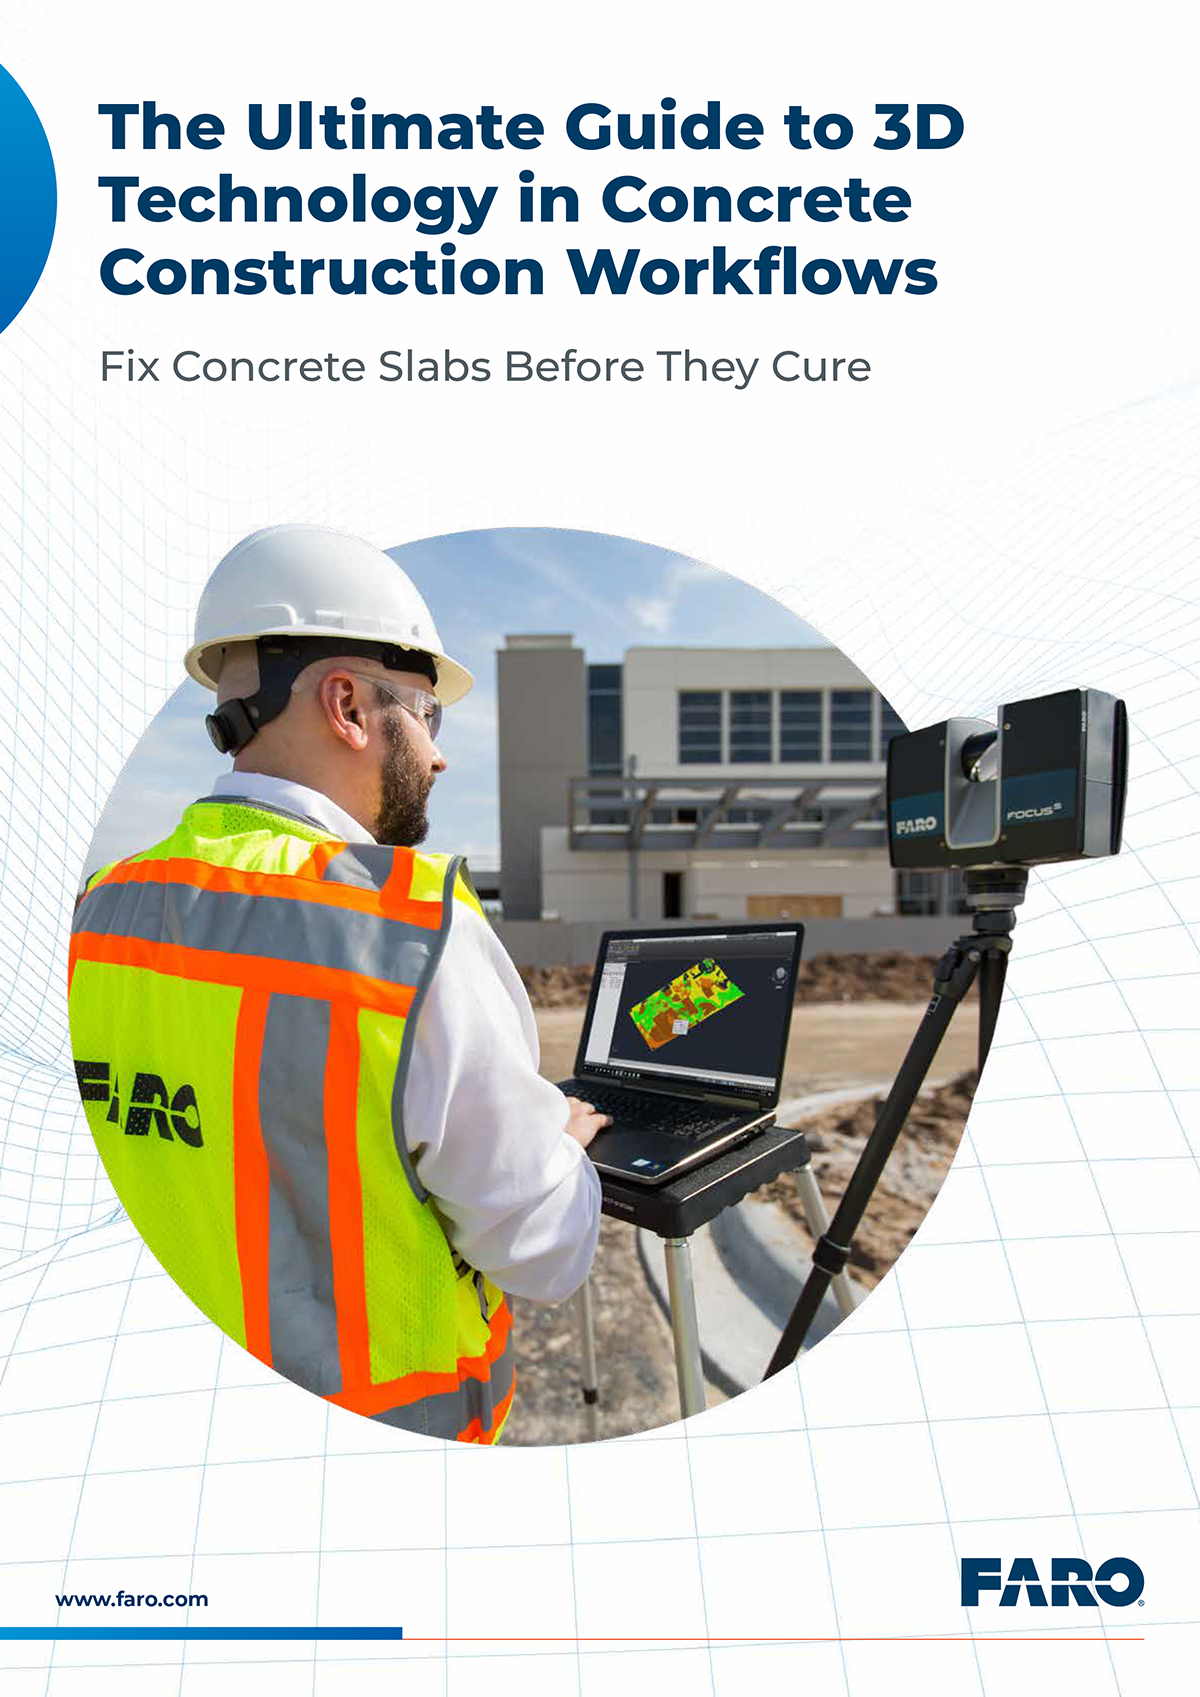 The Ultimate Guide to 3D Technology in Concrete Construction Workflows